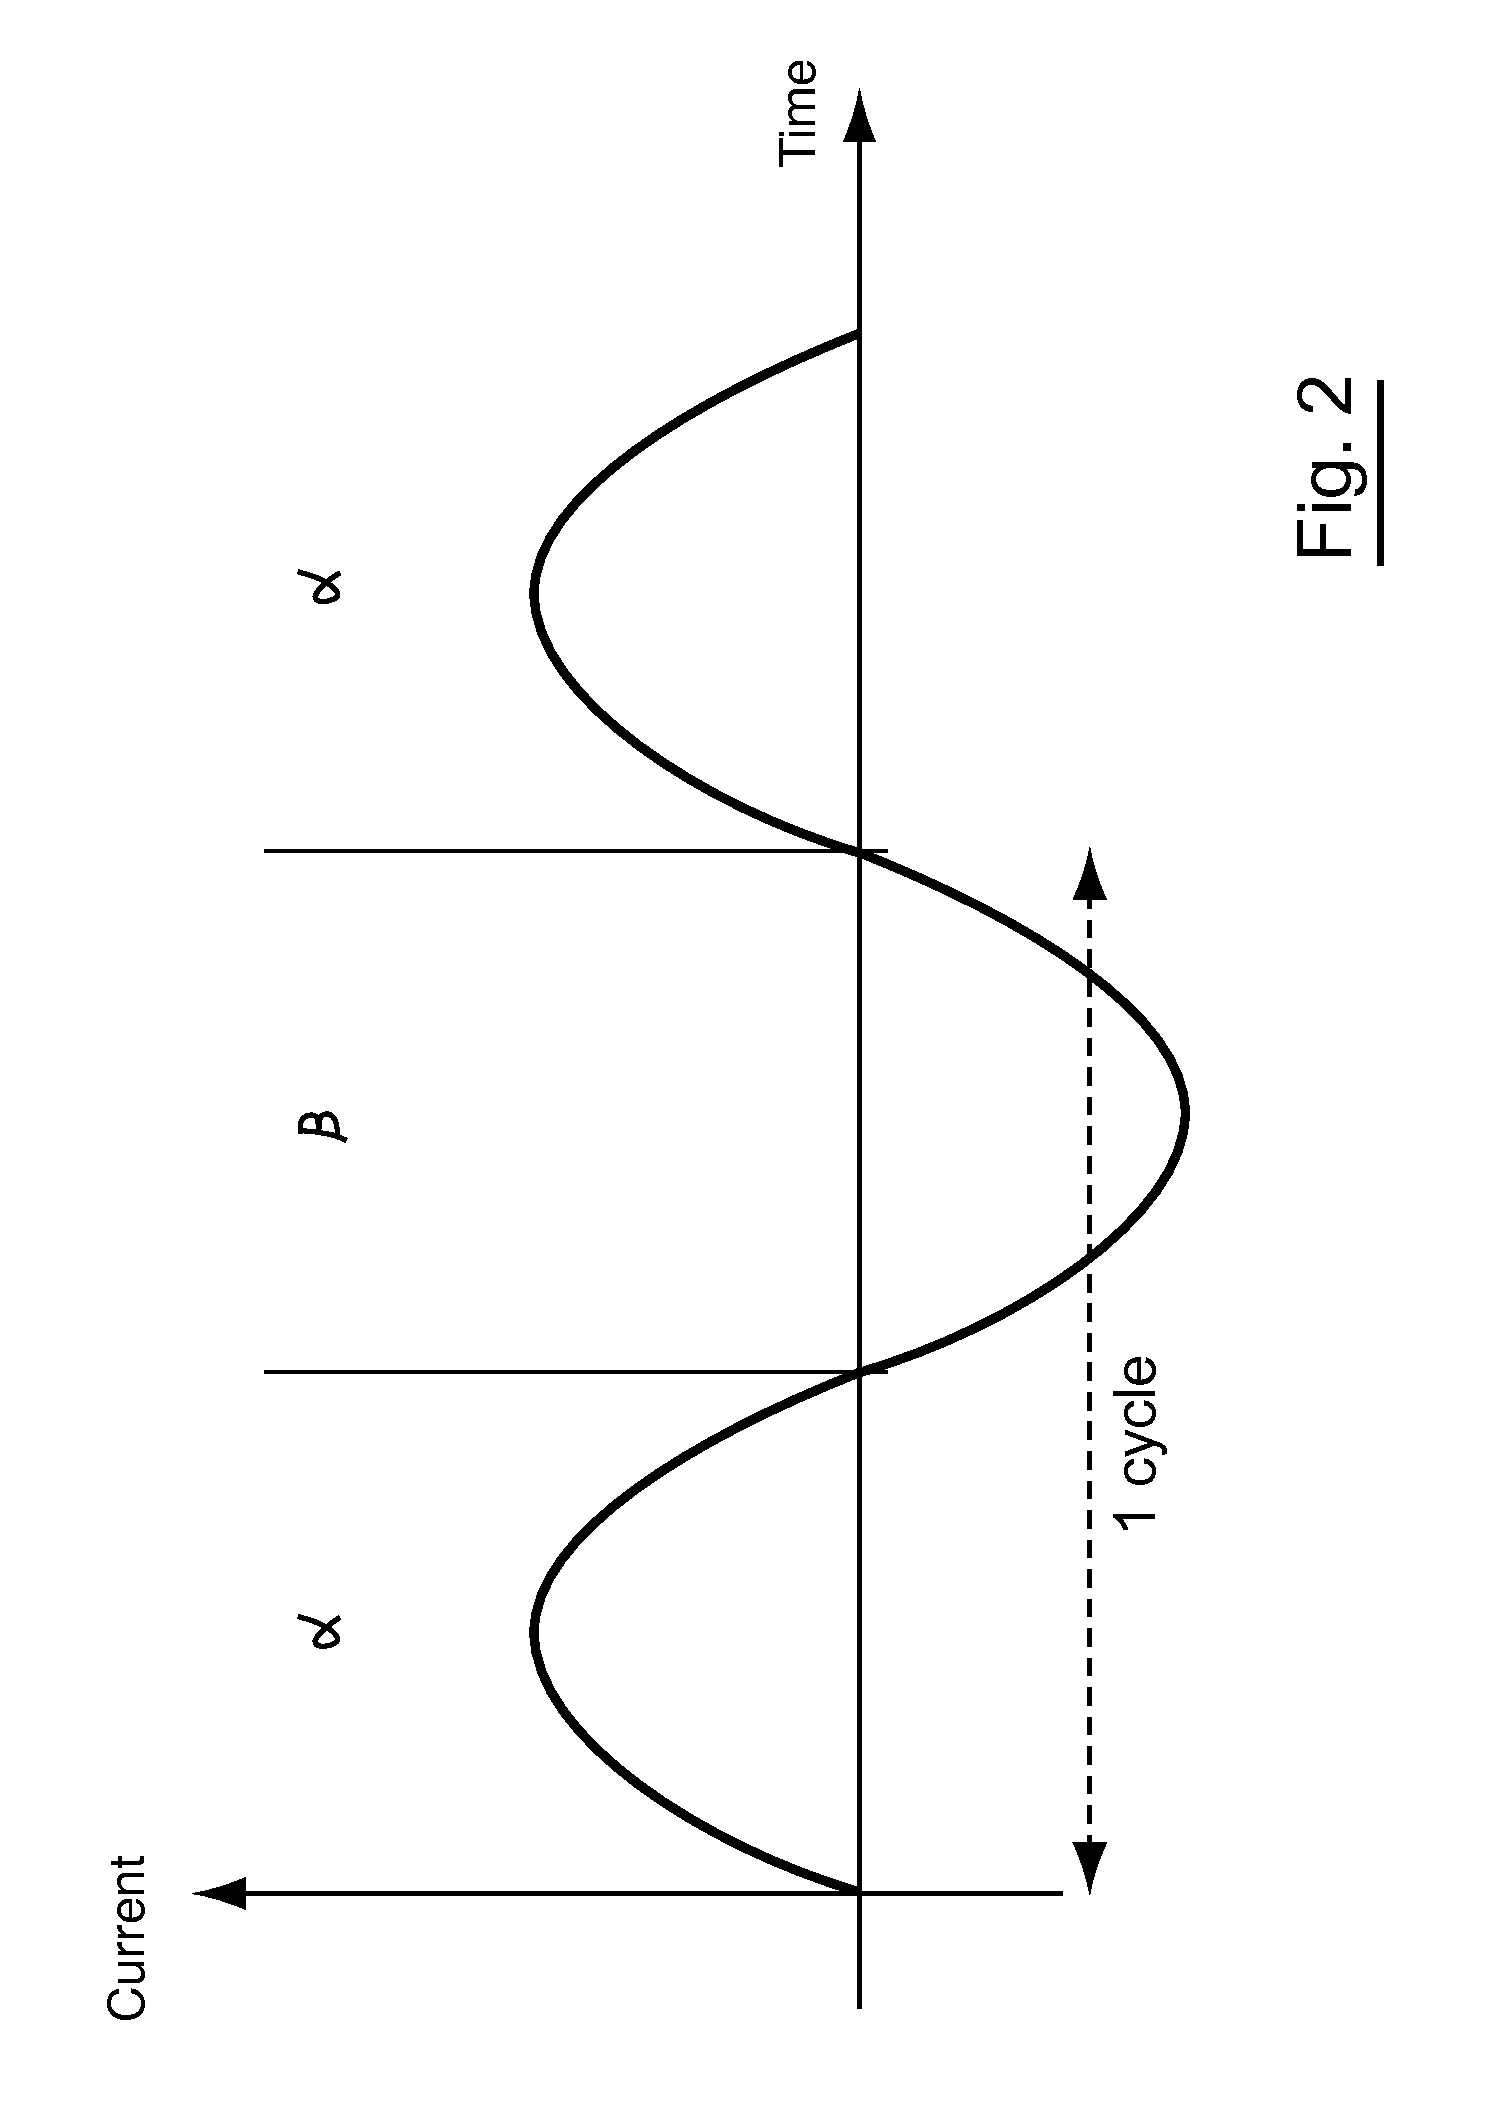 Electromagnetic pump with oscillating piston